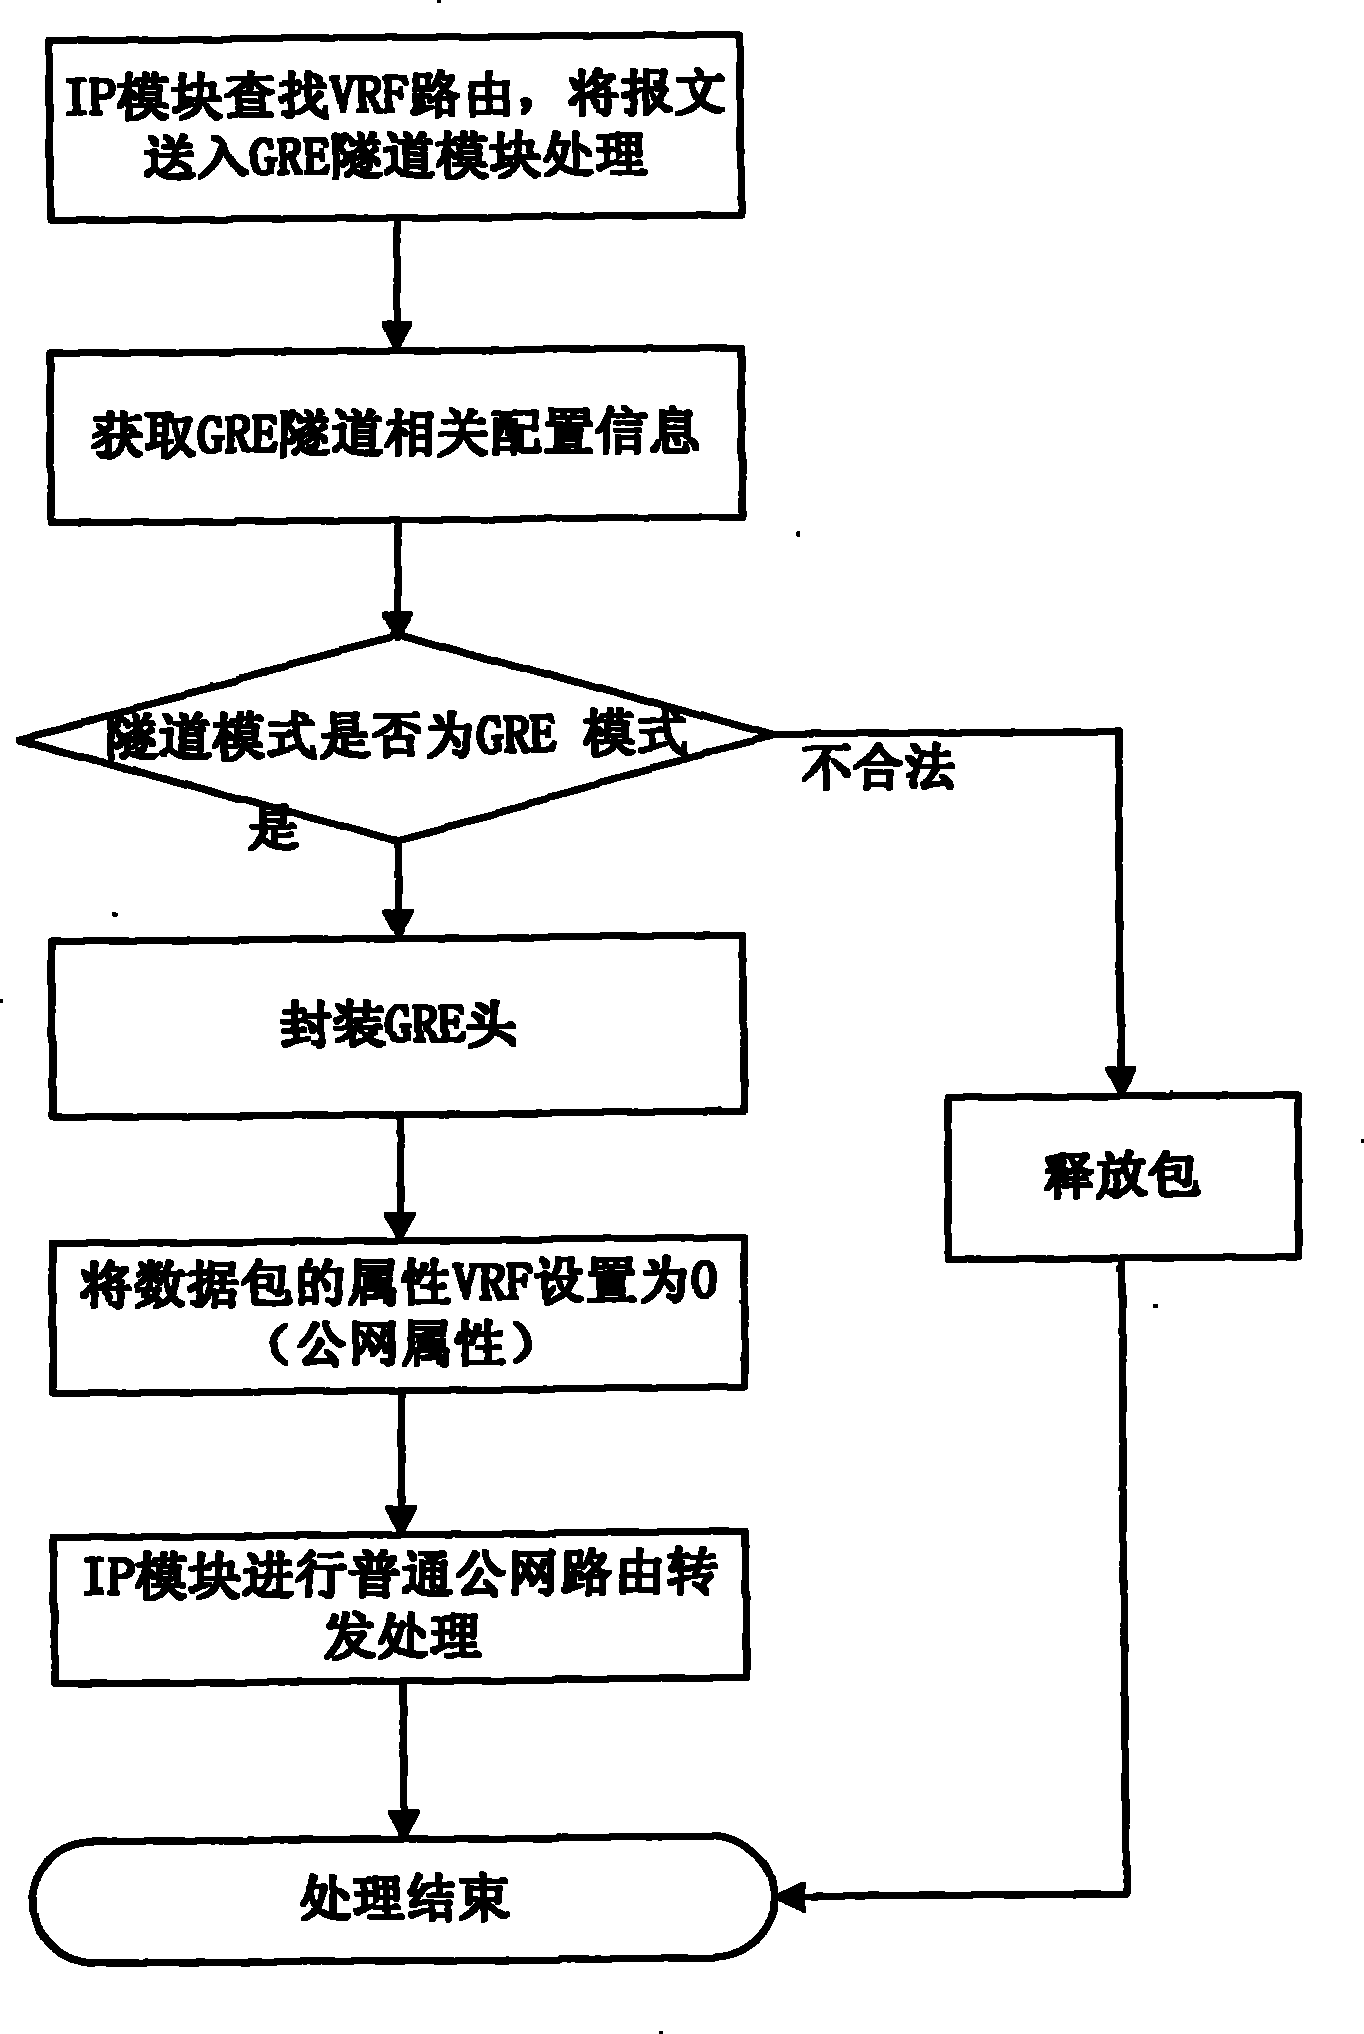 A system and method for realizing virtual private network communication